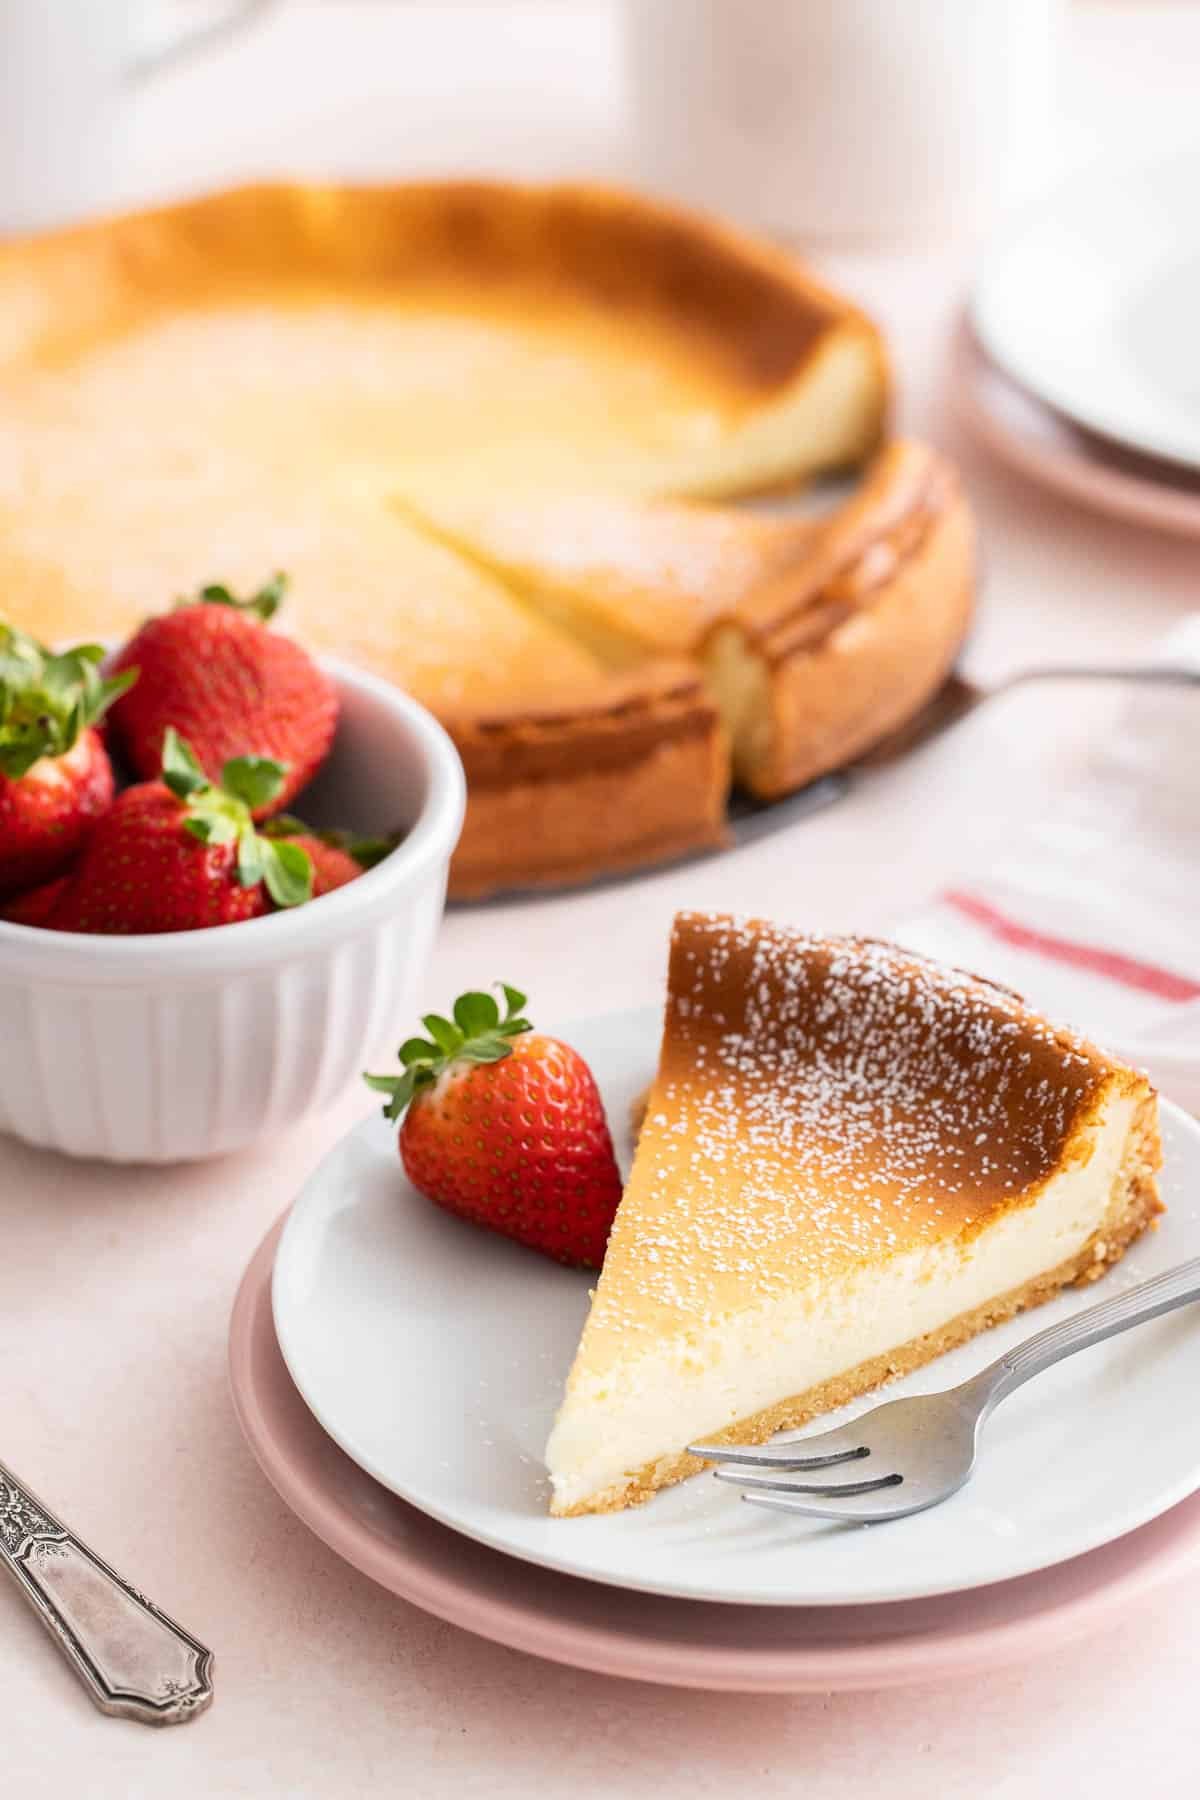 A cheesecake on a cake stand with a slice of cake in front of it.